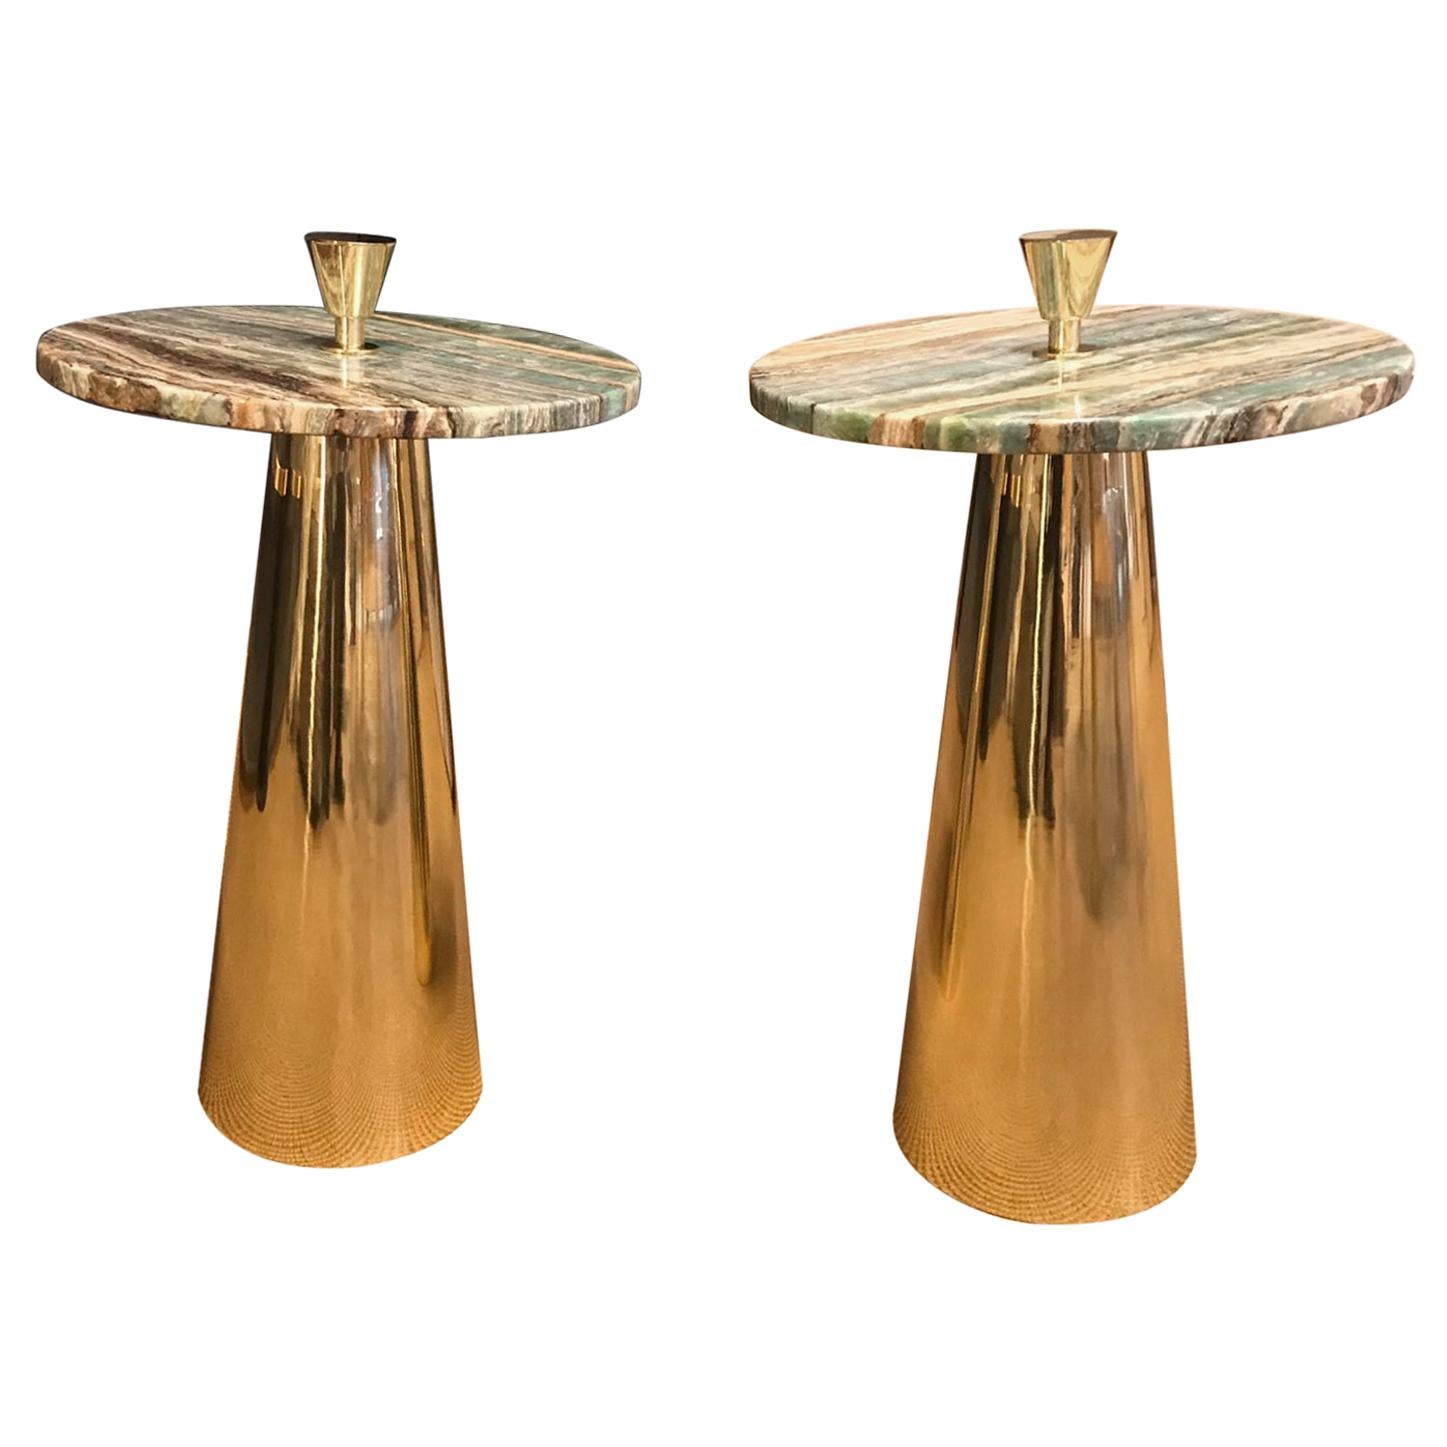 Pair of Round Emerald Green Onyx Marble and Brass Side Tables, Milan, Italy 2019